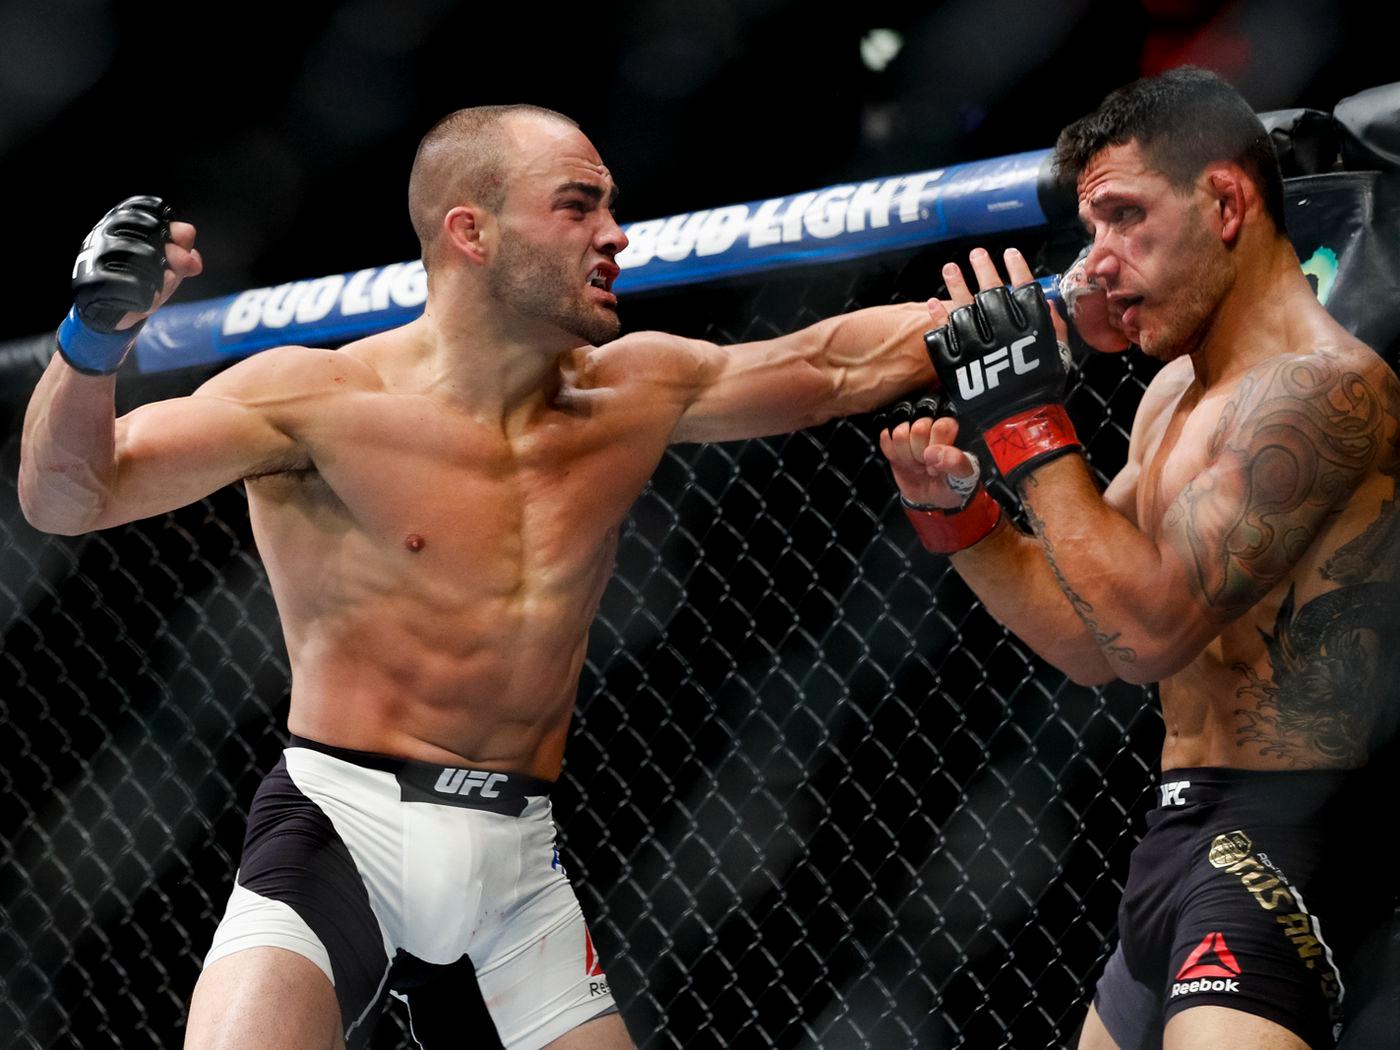 Eddie Alvarez defeated Rafael Dos Anjos to win the lightweight title. Photo by MMA Fighting.